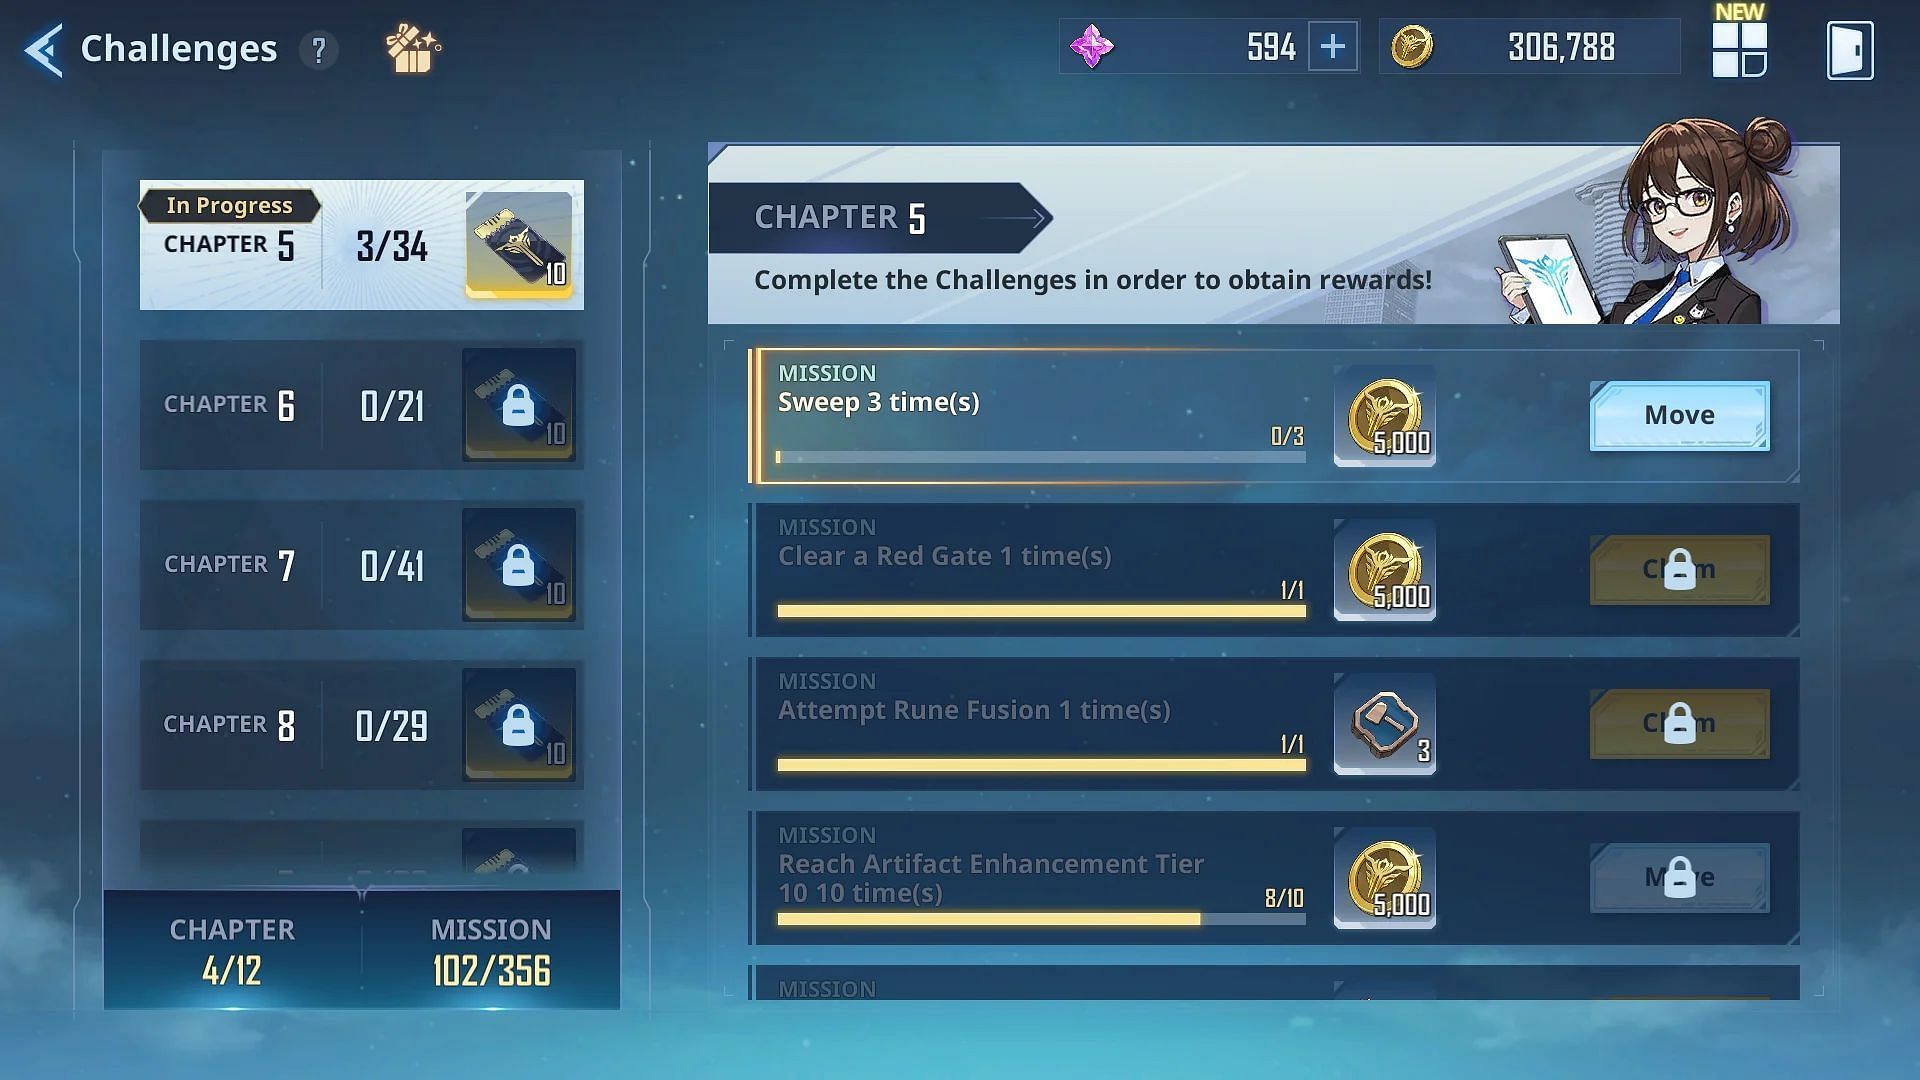 Chapter 5 has a battle mission you can complete after you have cleared Chapter 6 (Image via Netmarble)